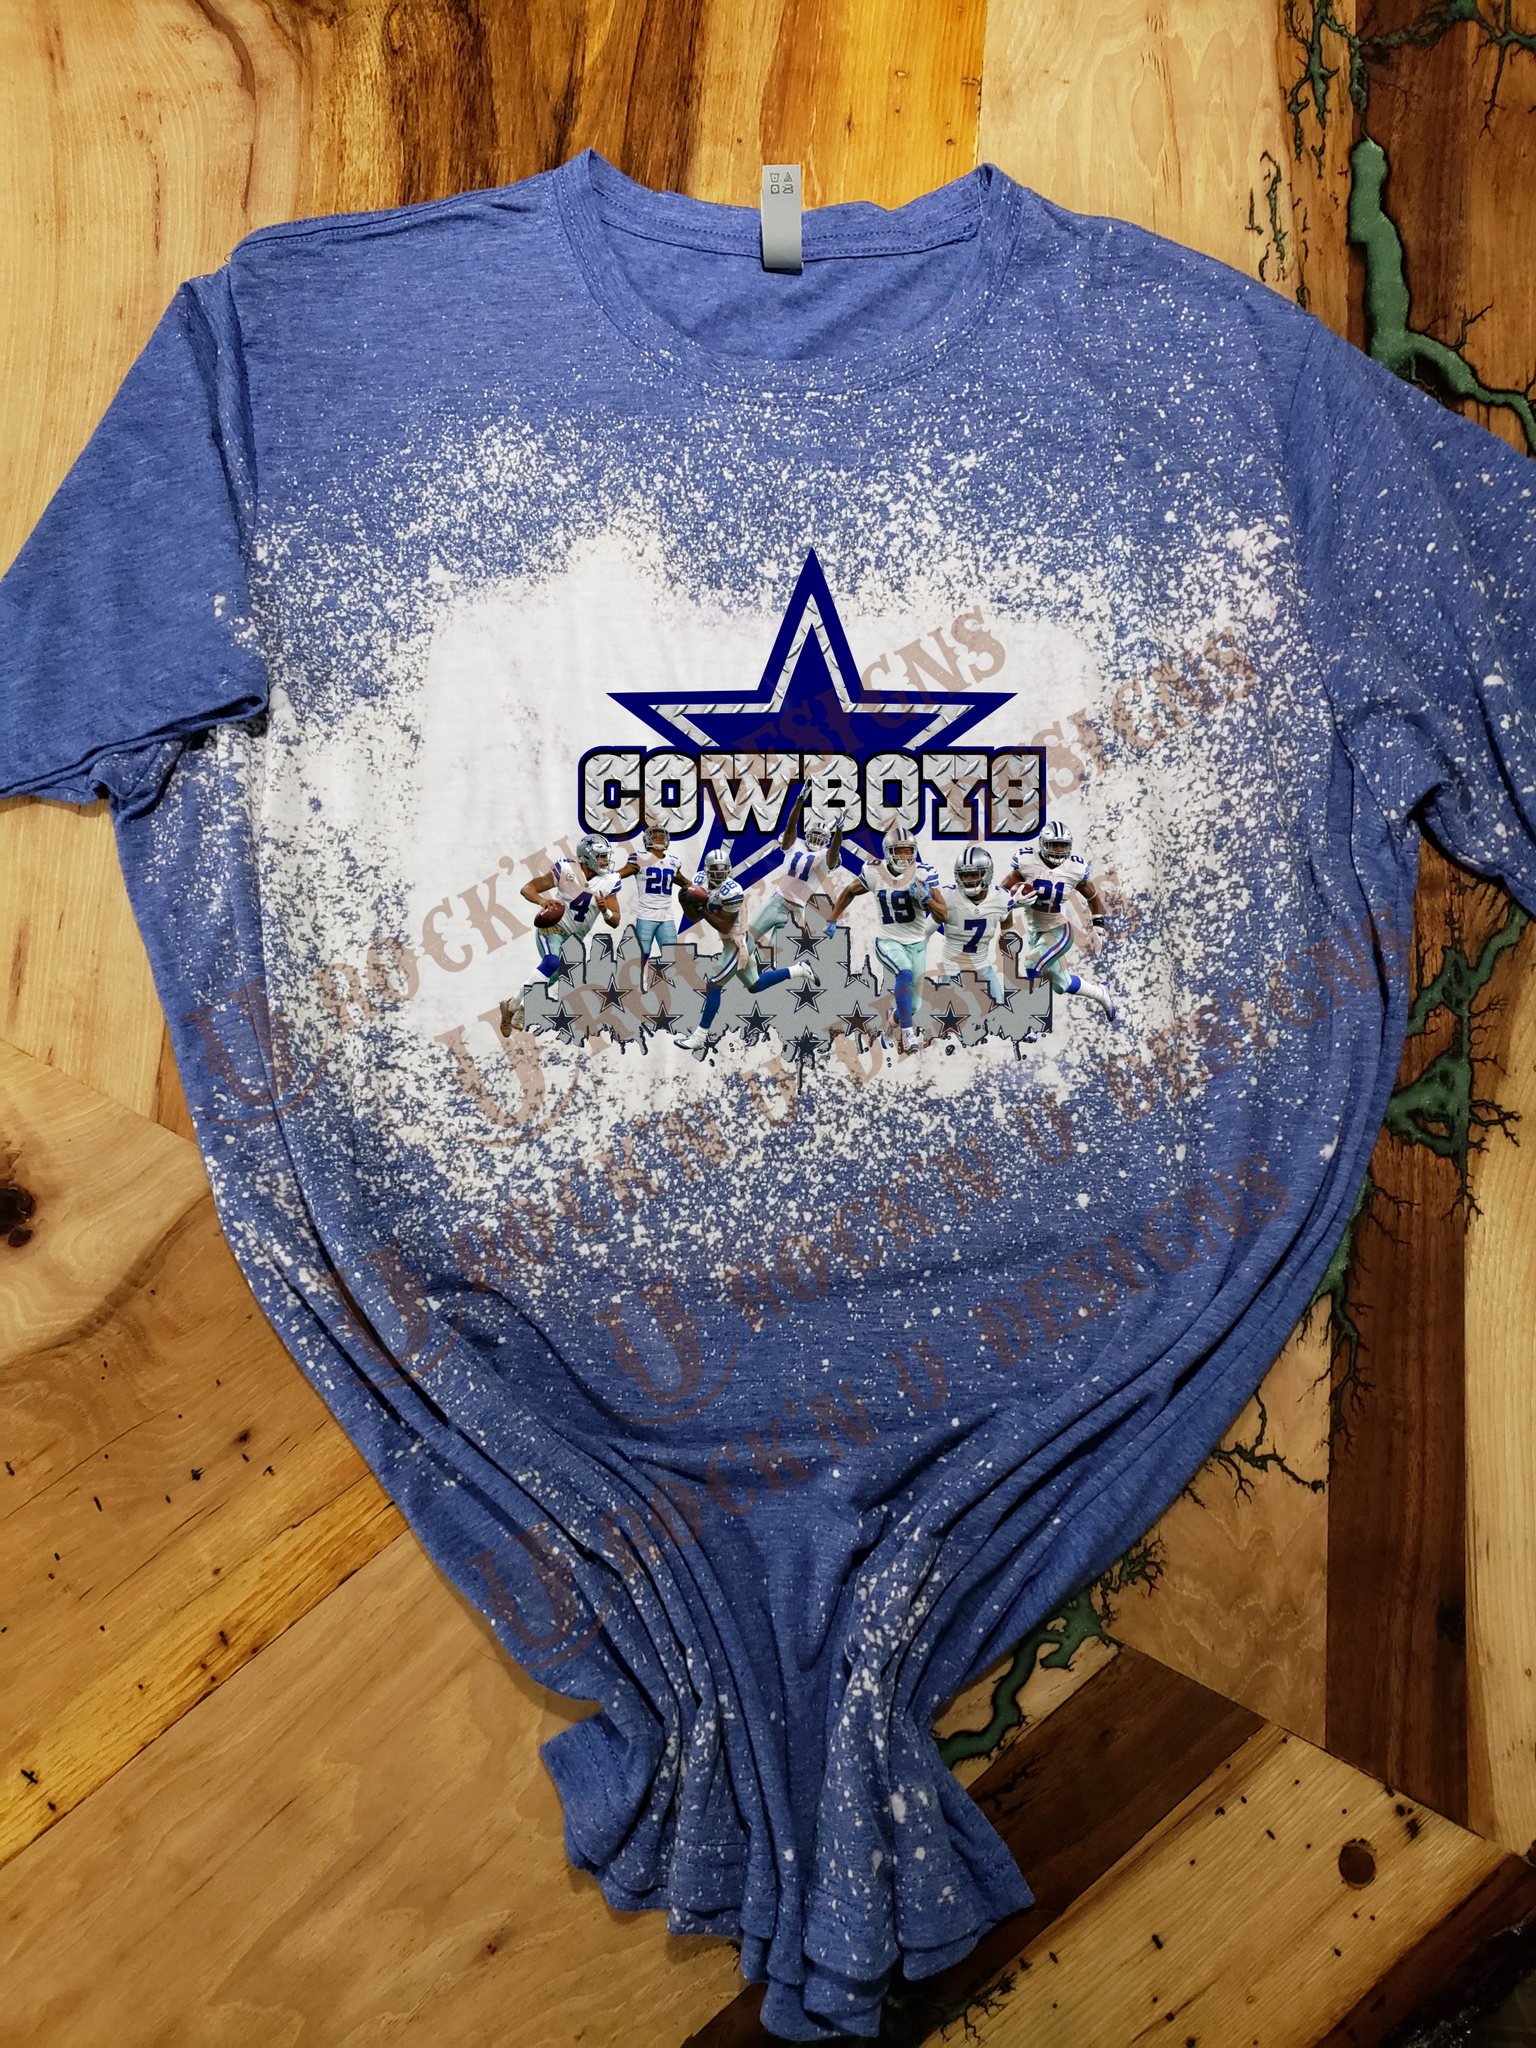 I have other Dallas Cowboys designs too upon request. These bleached s